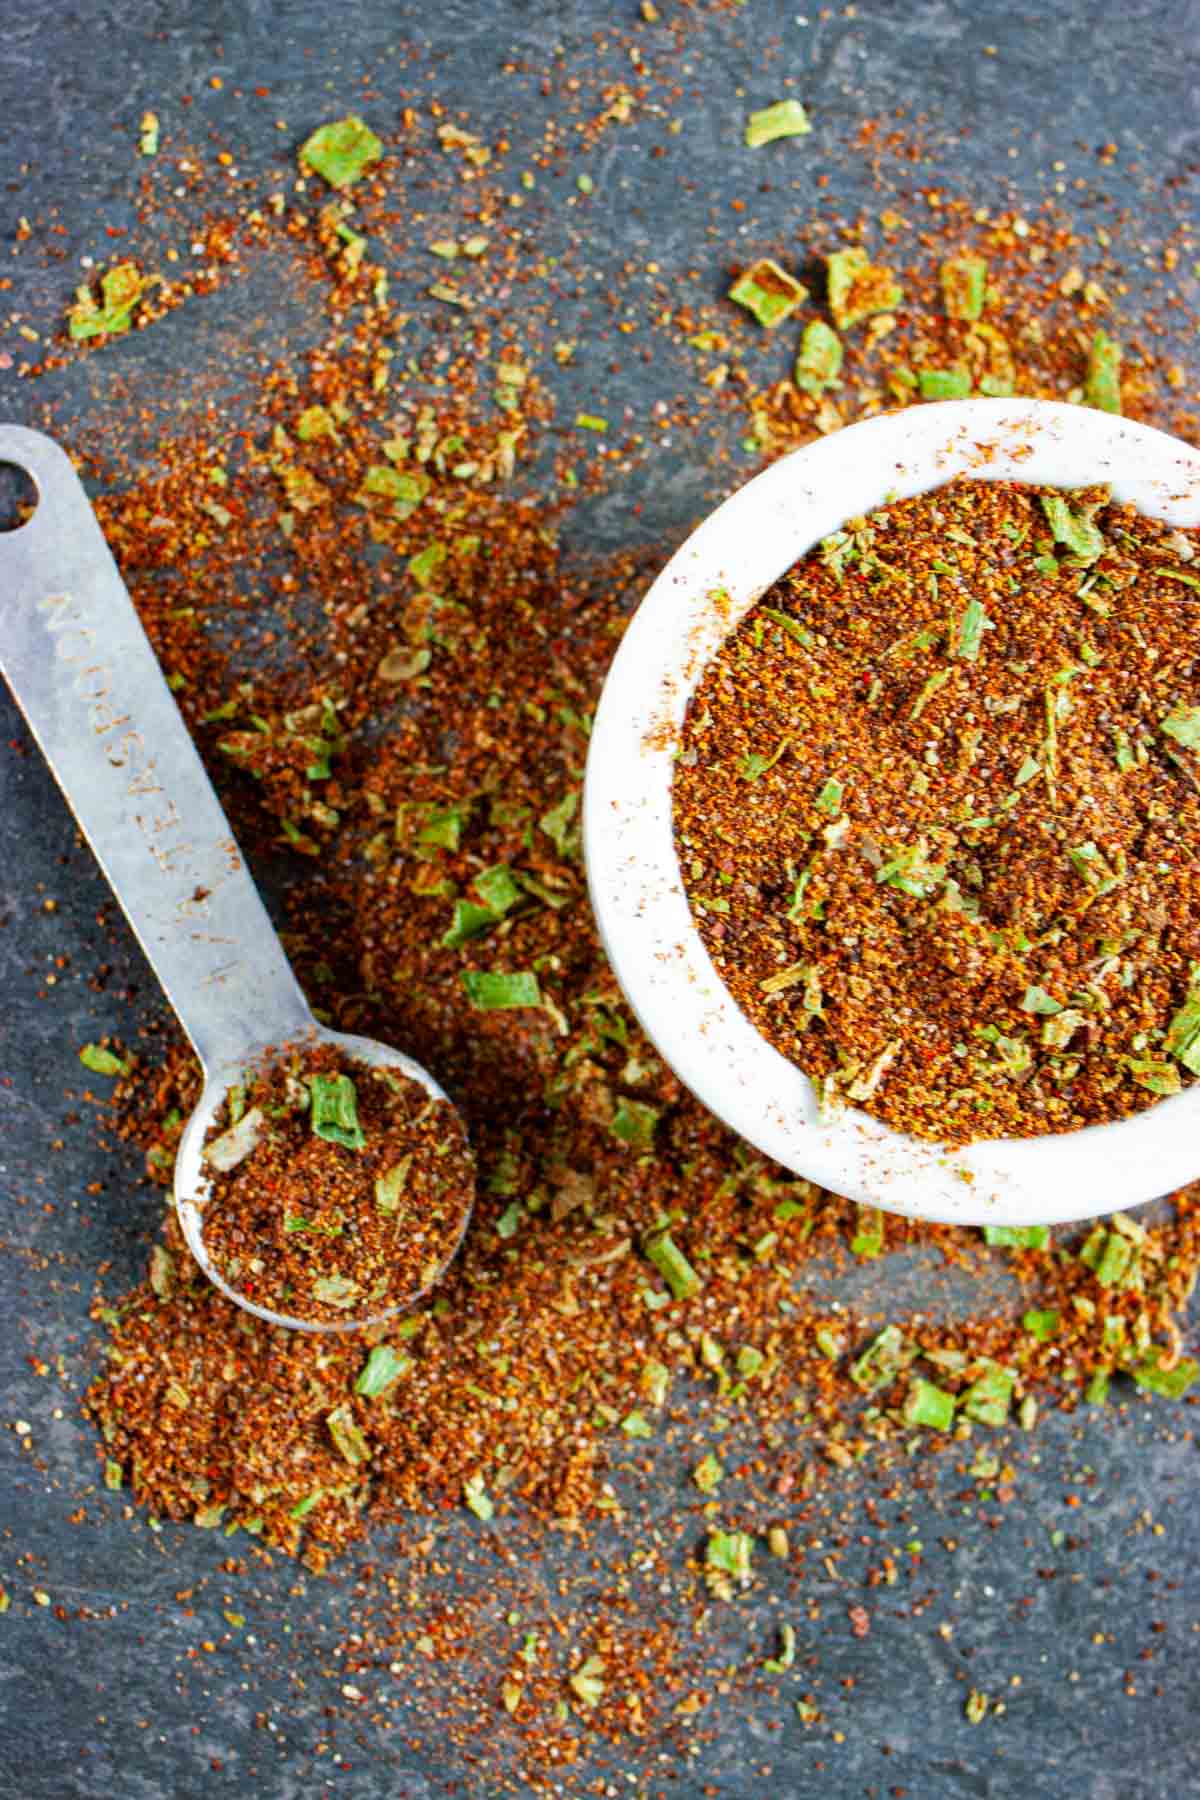 Taco seasoning in a small white bowl and teaspoon and scattered on a grey background.